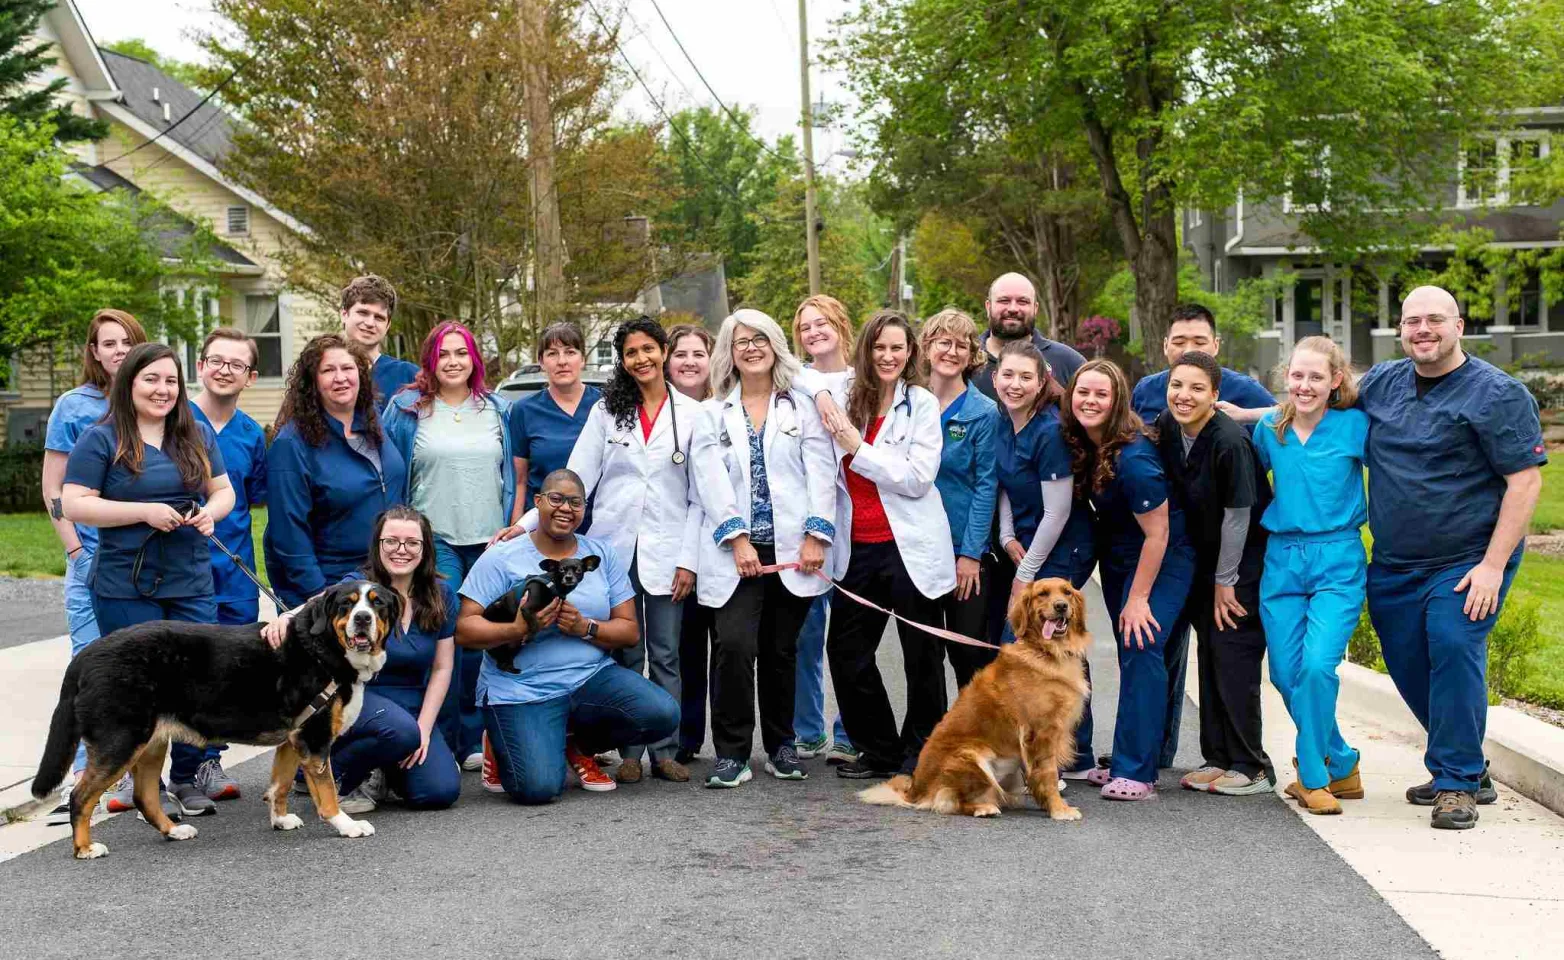 A group photo of all the staff at Alpine Veterinary Hospital out front of the hospital